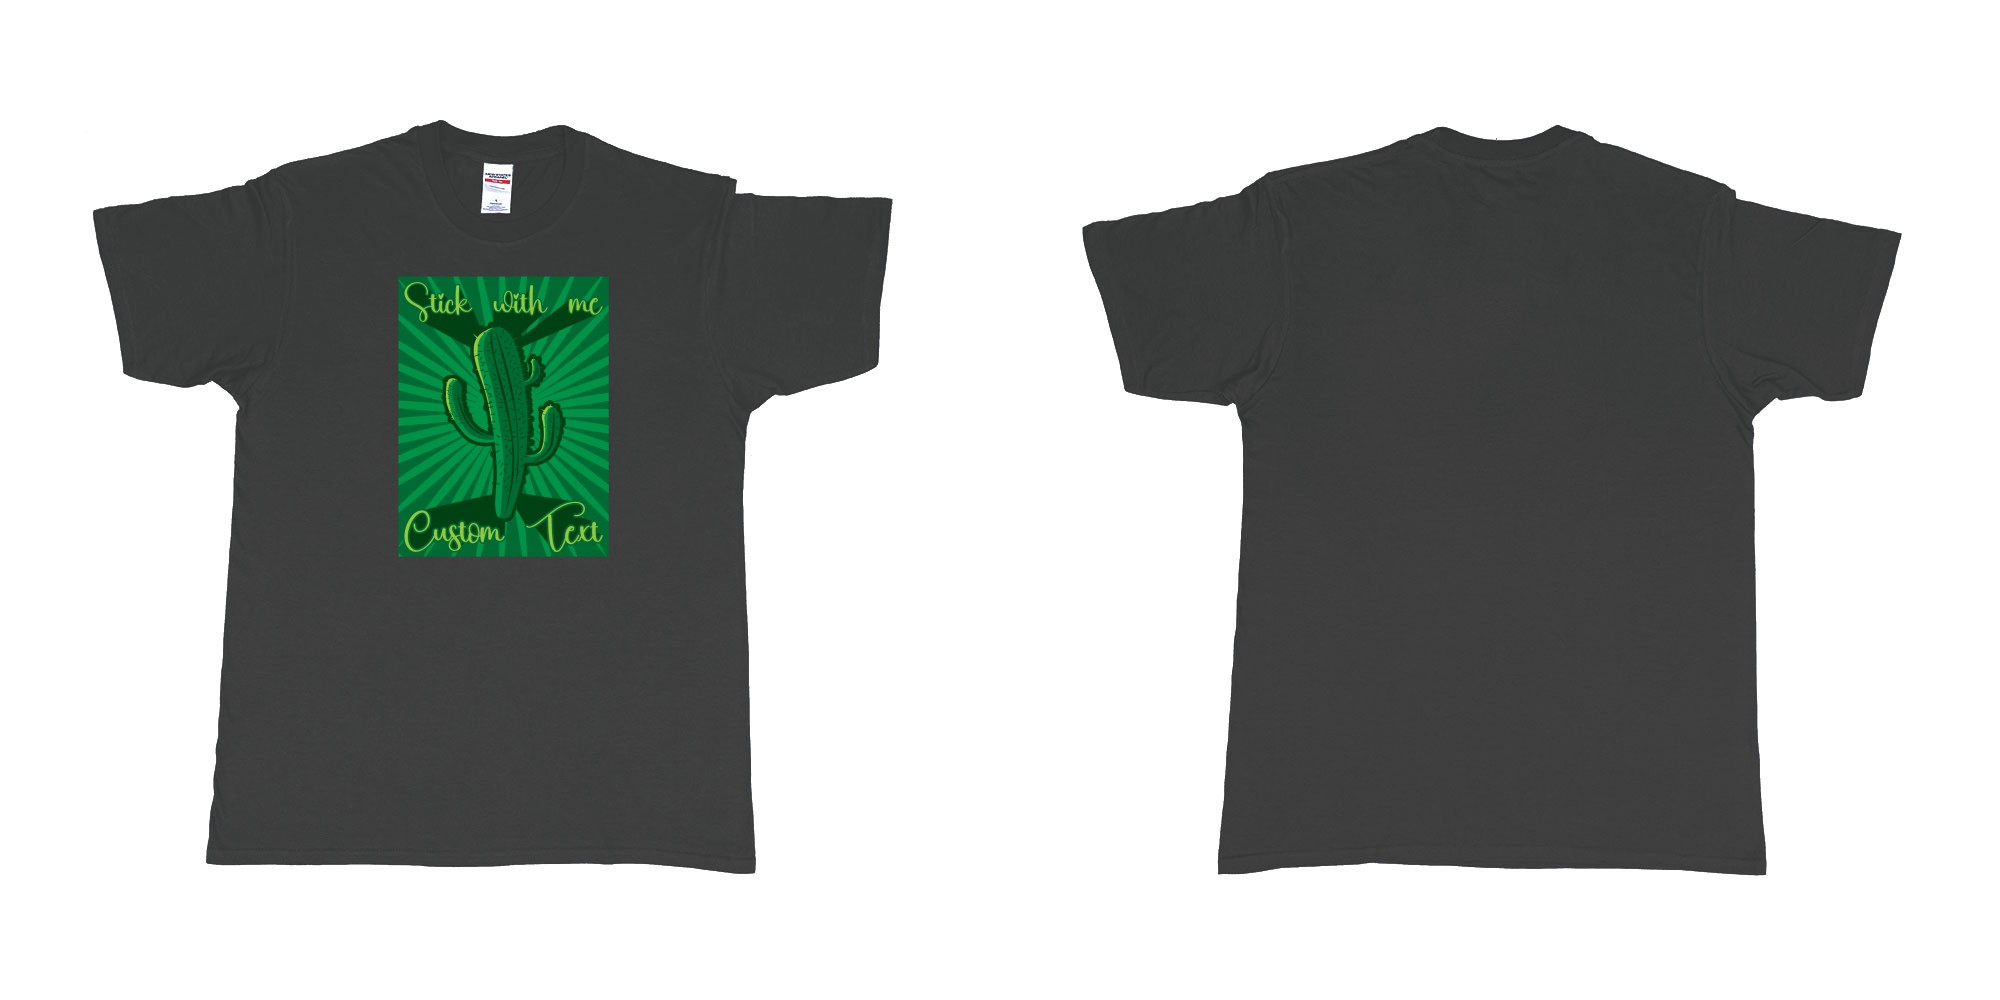 Custom tshirt design cactus stick with me in fabric color black choice your own text made in Bali by The Pirate Way